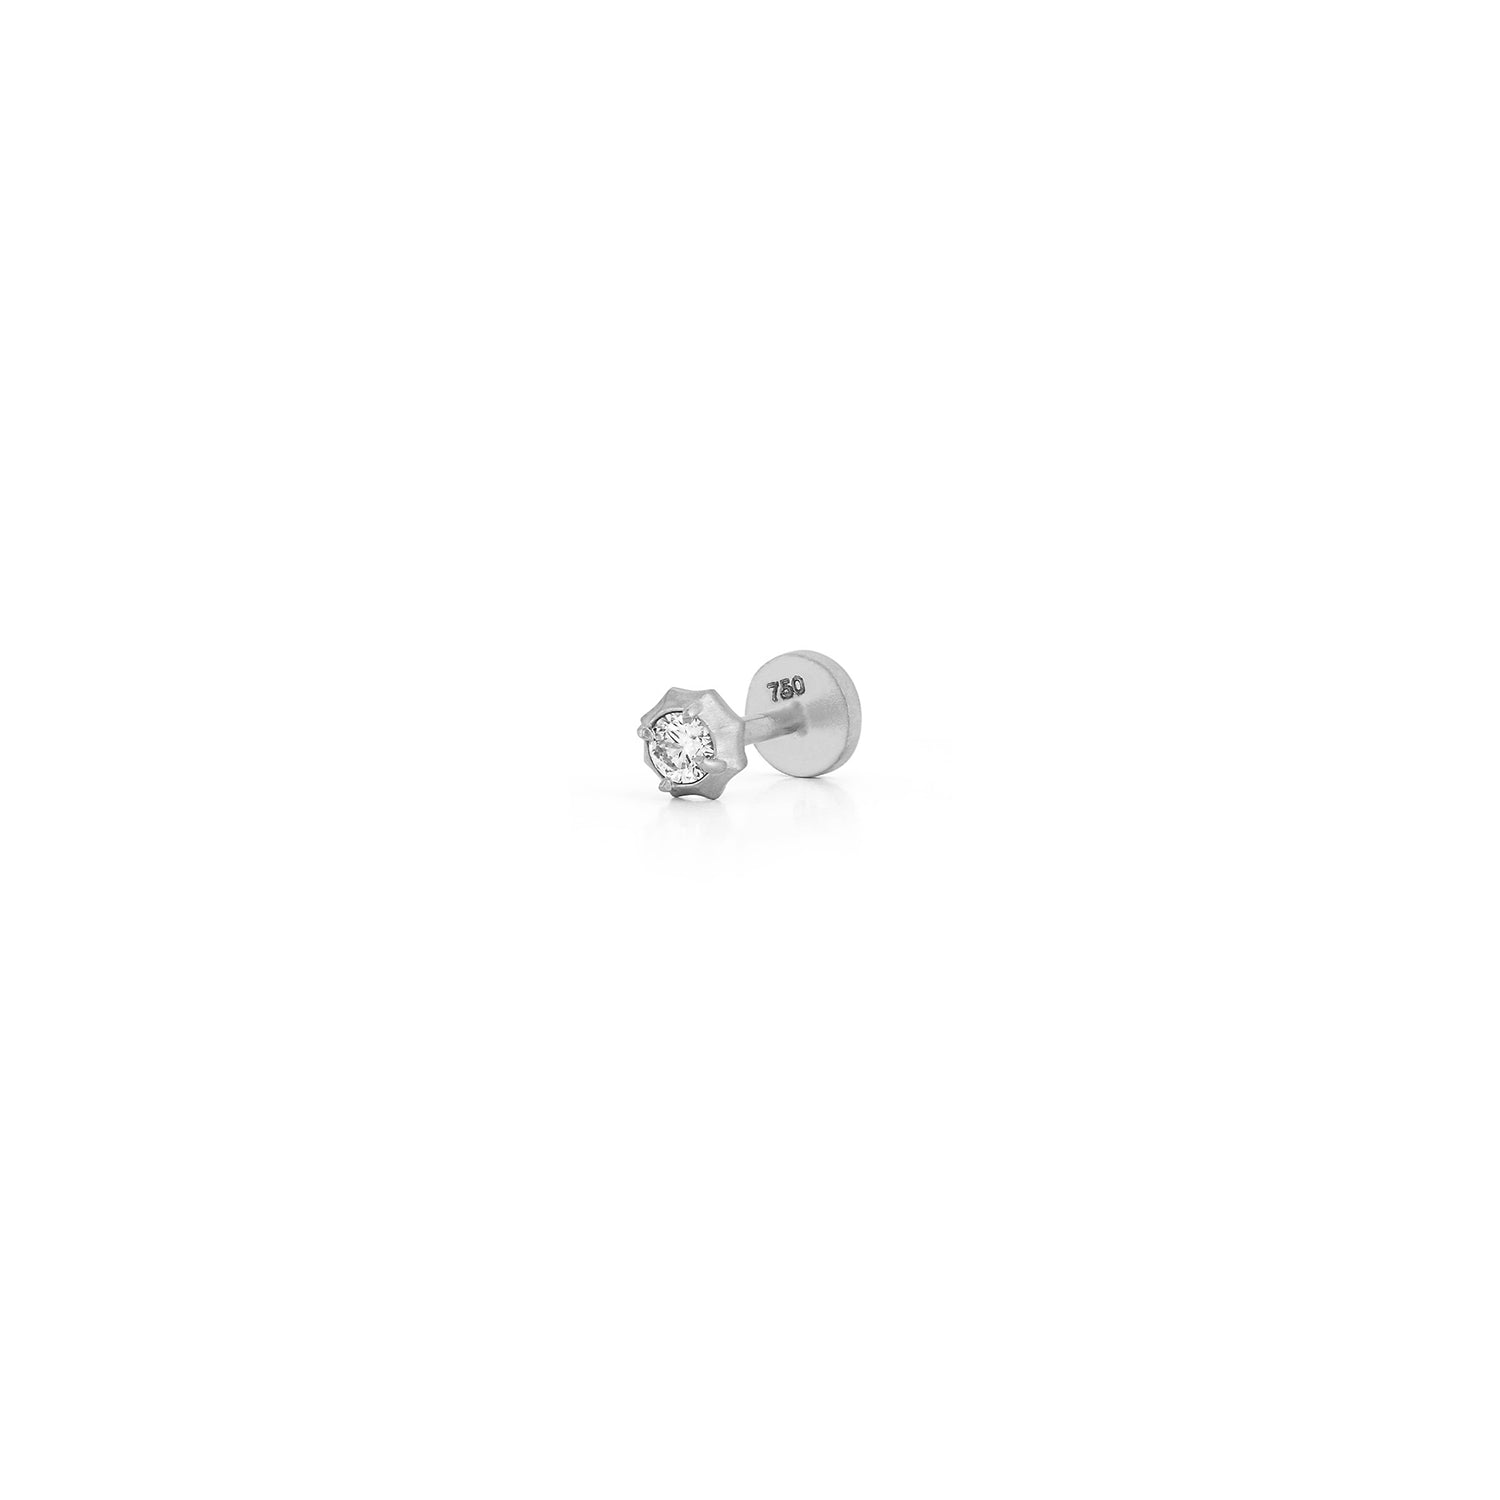 Small Sophisticate Piercing Stud 2.5